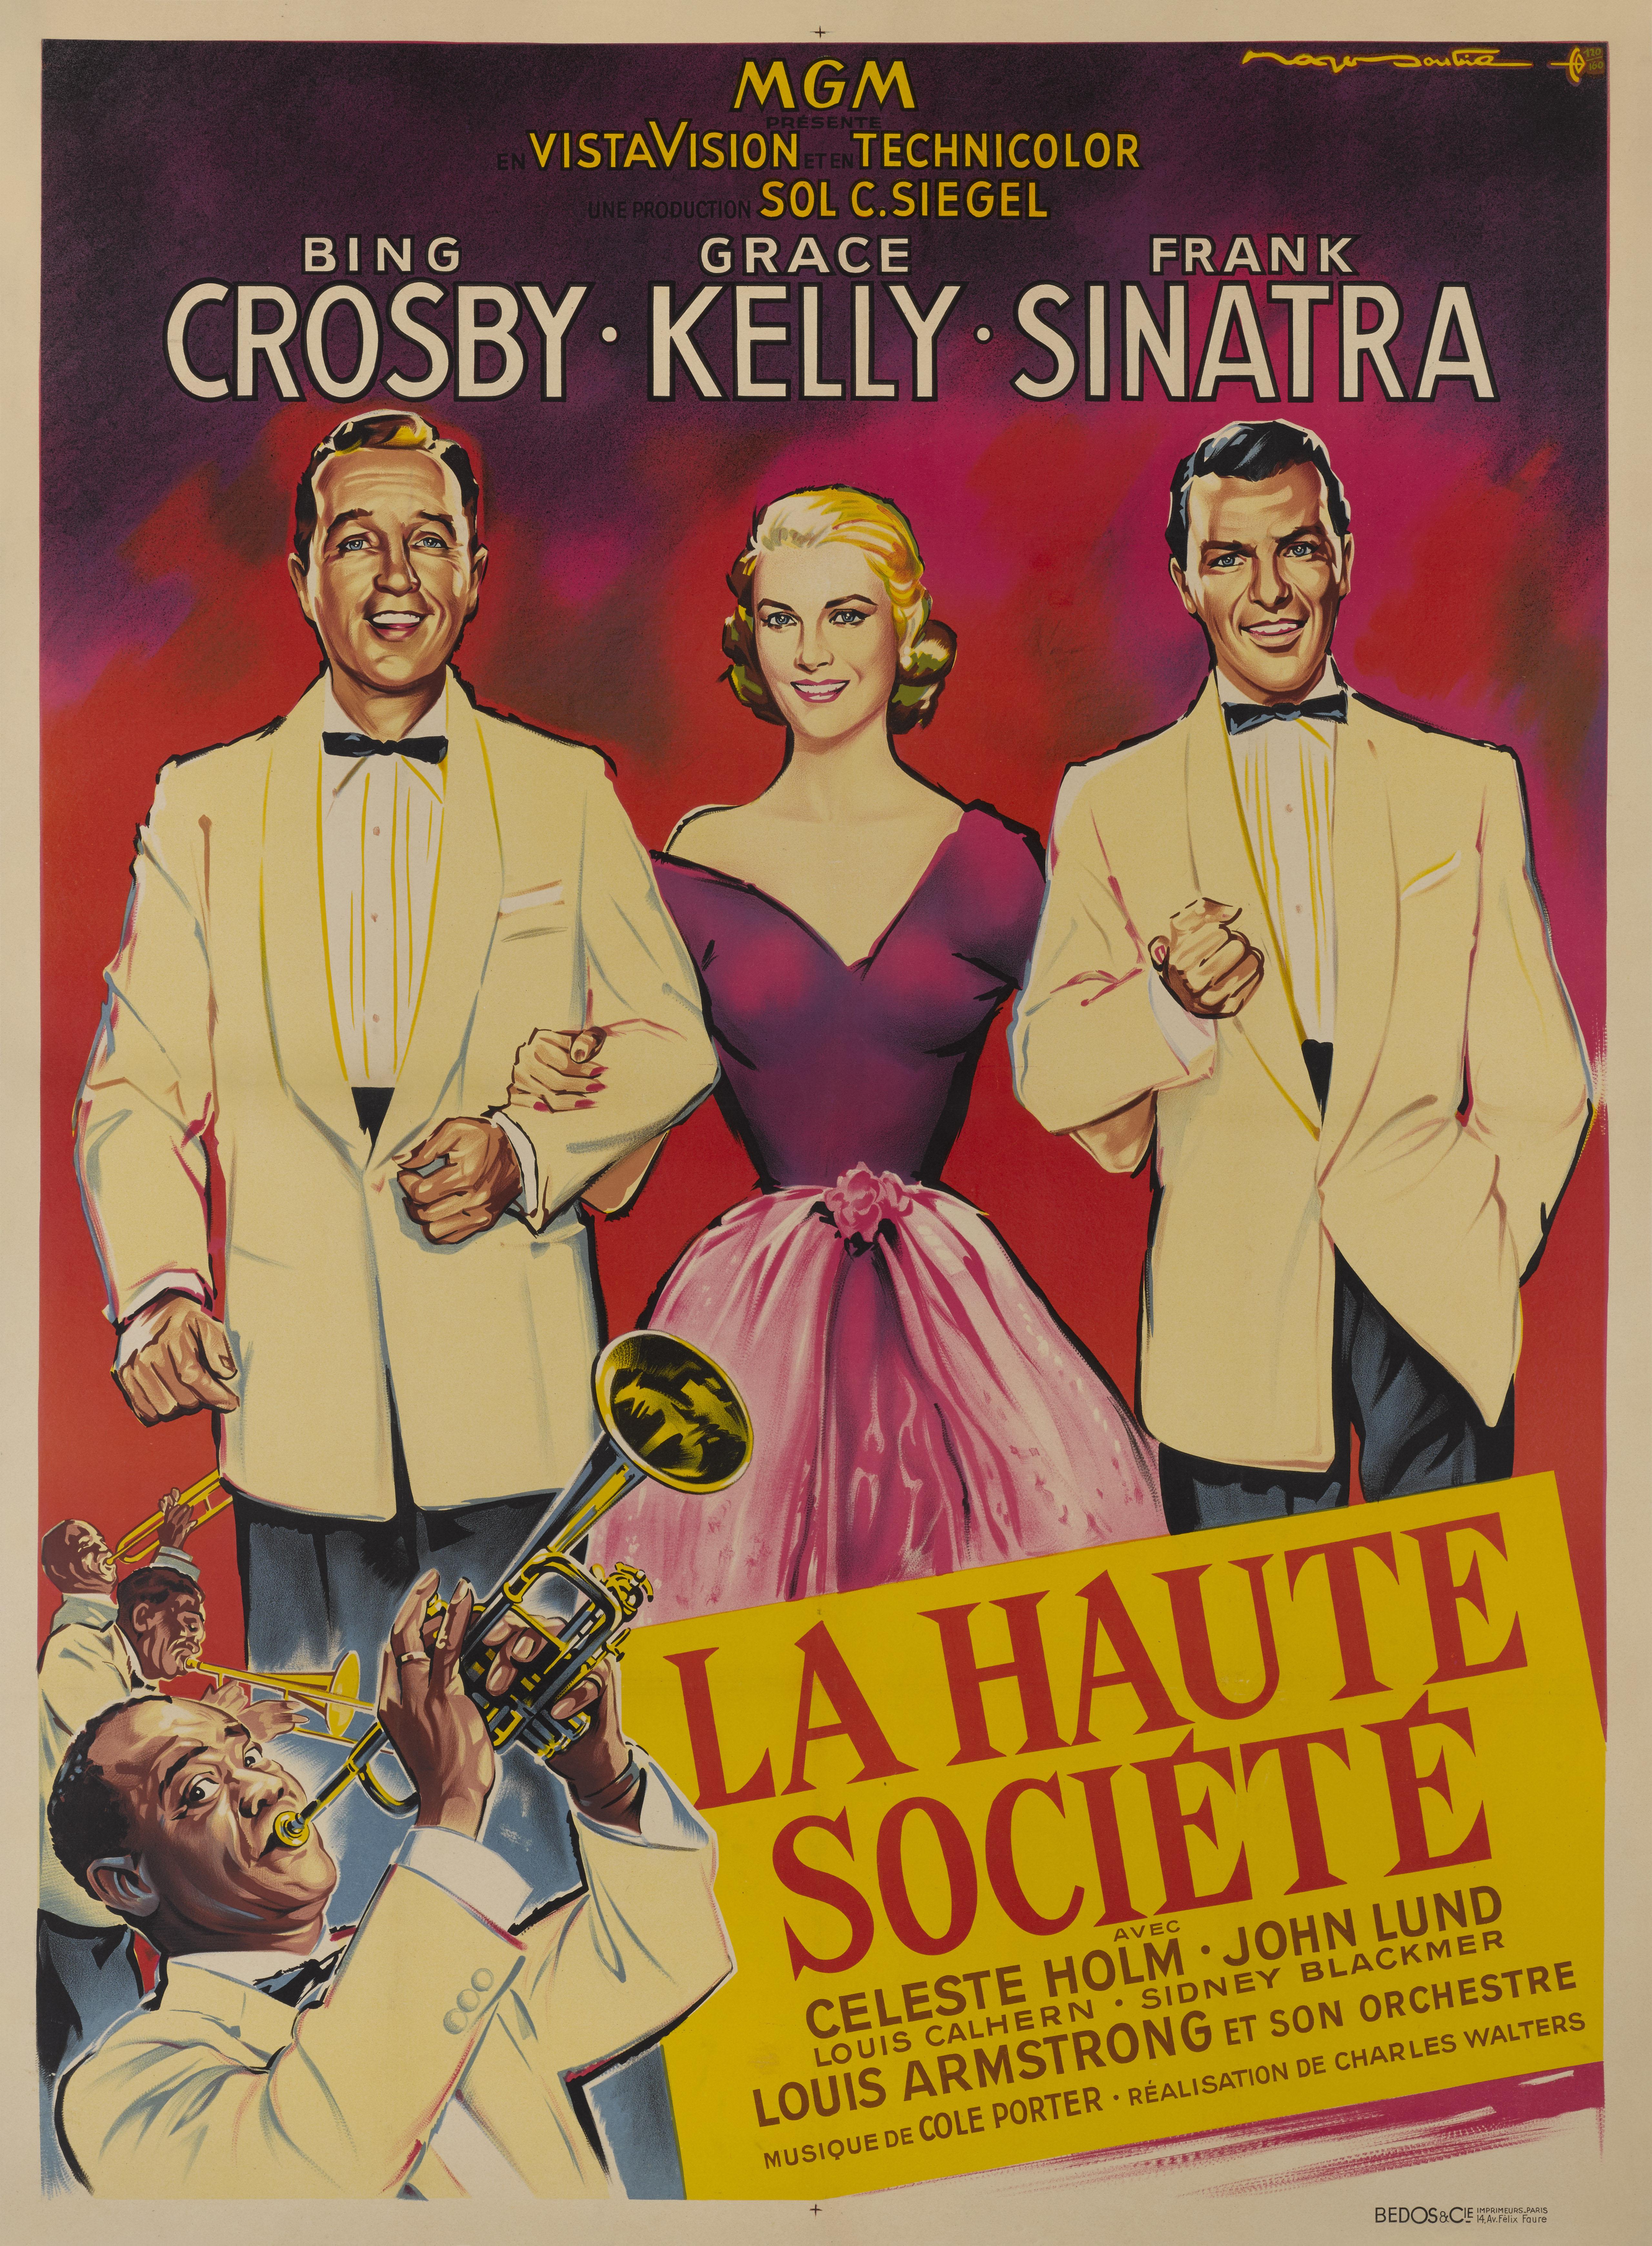 Original French film poster for the 1956 musical staring Big Crosby, Grace Kelly,
Frank Sinatra and Louis Armstrong. This wonderful musical was a remake of the 1941 film The Philadelphia Story, starring Frank Sinatra, Bing Crosby, Grace Kelly and